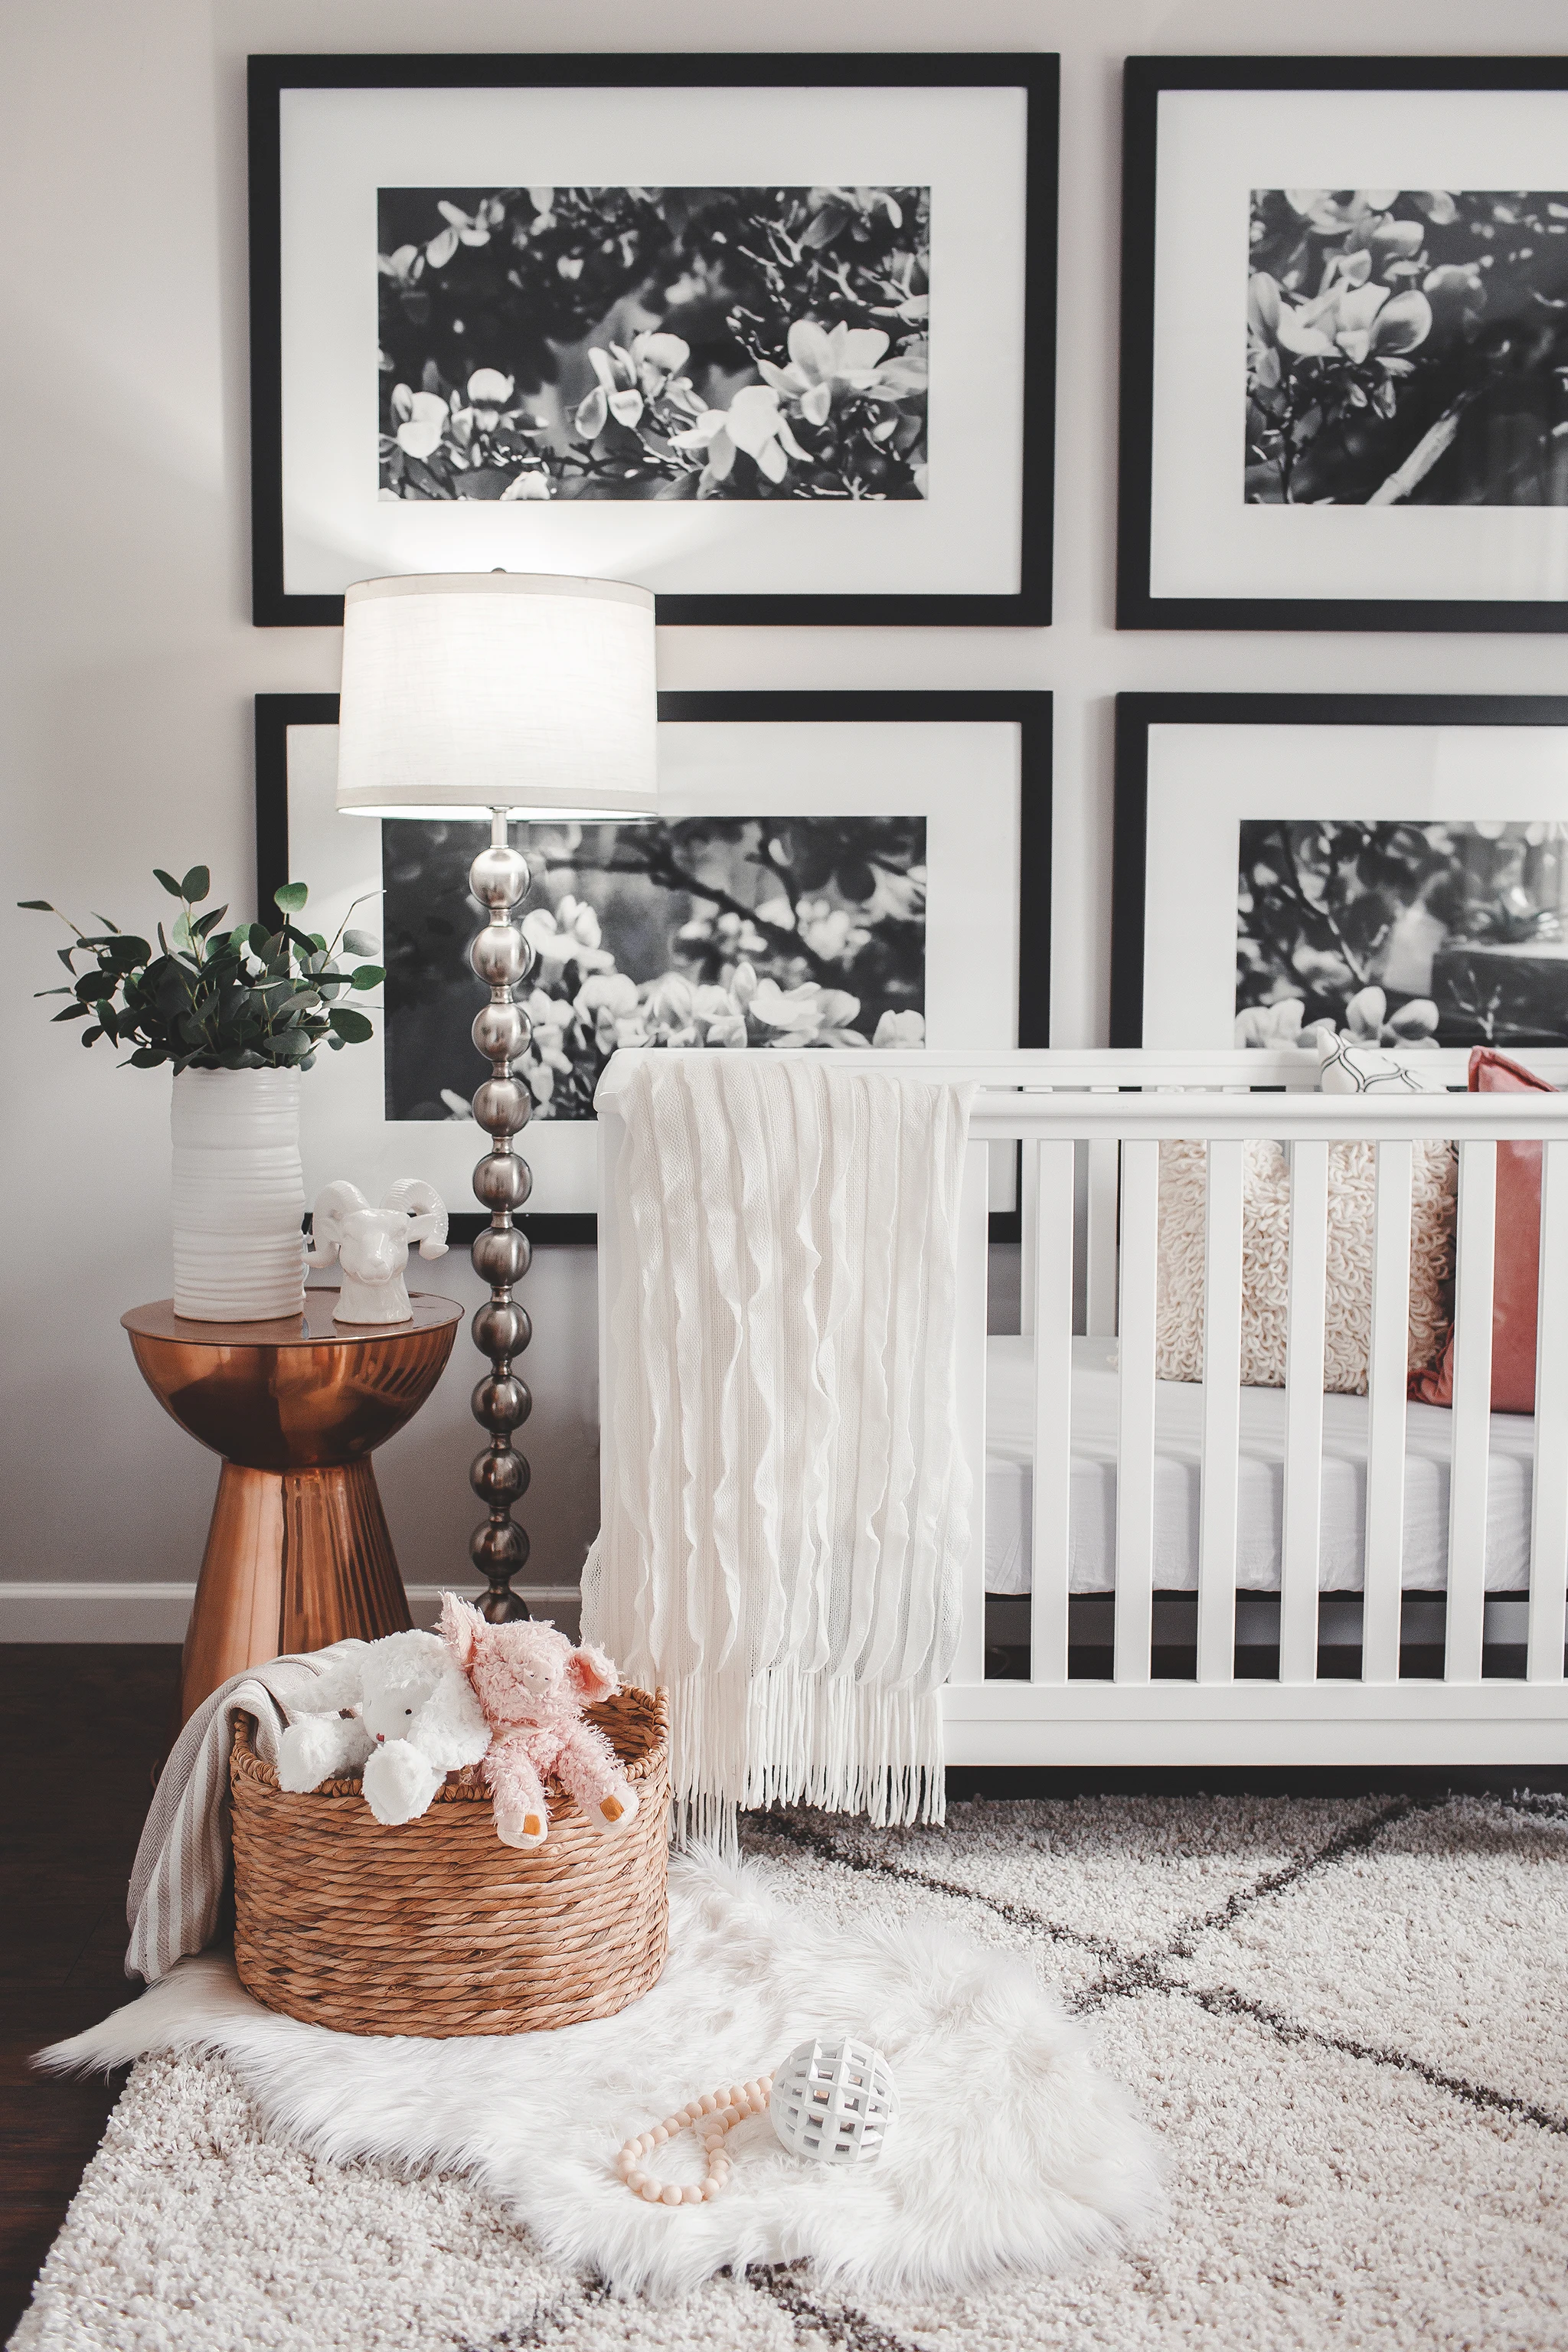 Large Black and White Floral Photos Behind Crib - Project Nursery